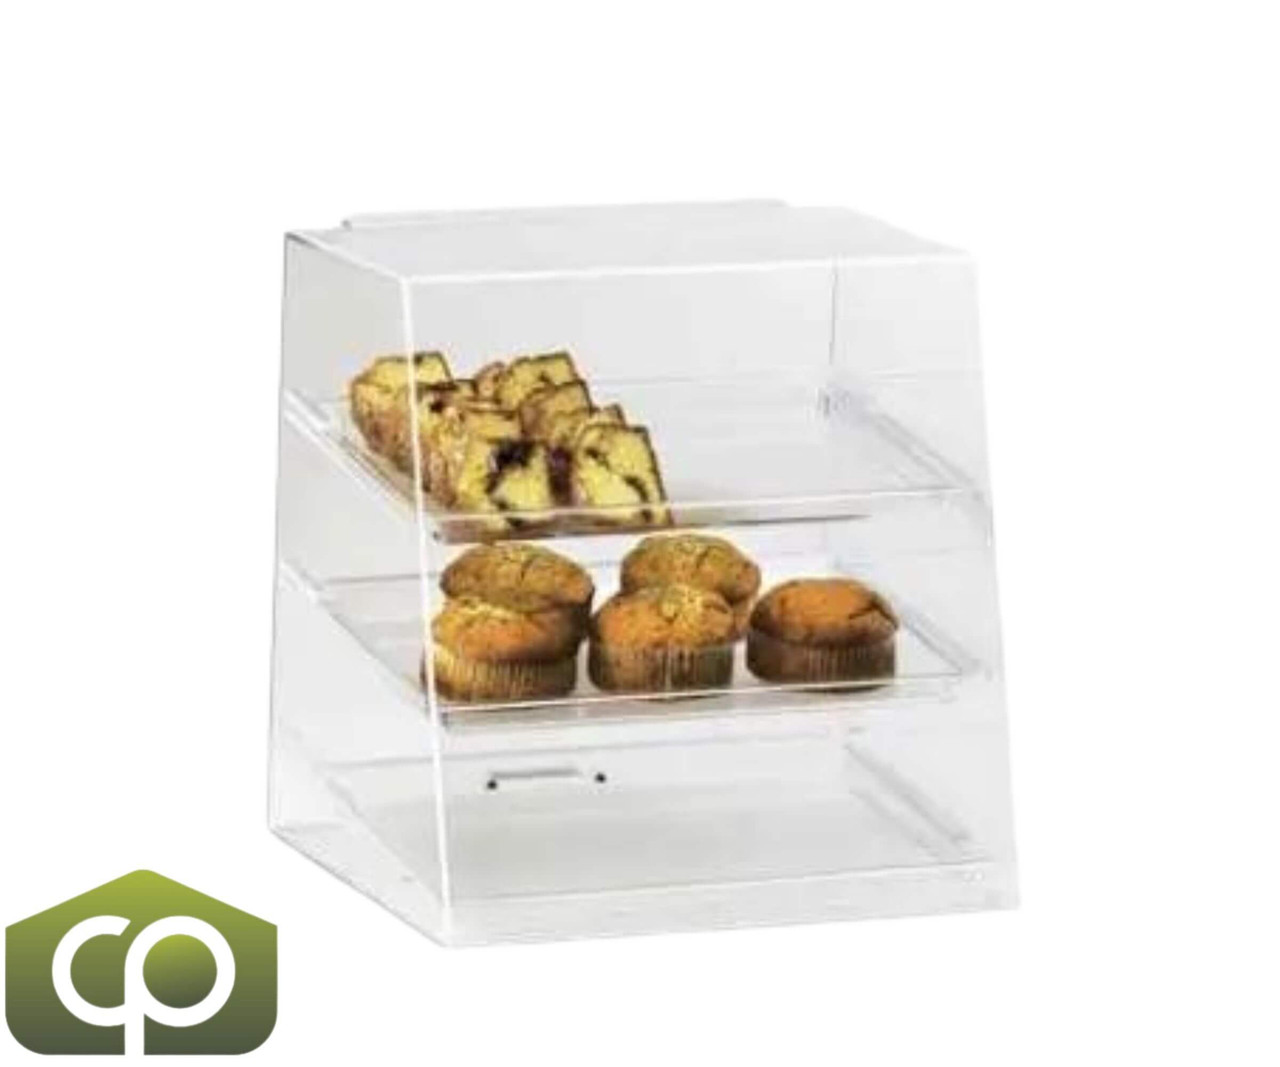 Cal-Mil Classic 15 1/2" x 15" x 16" Three Tier Acrylic Display Case-Chicken Pieces